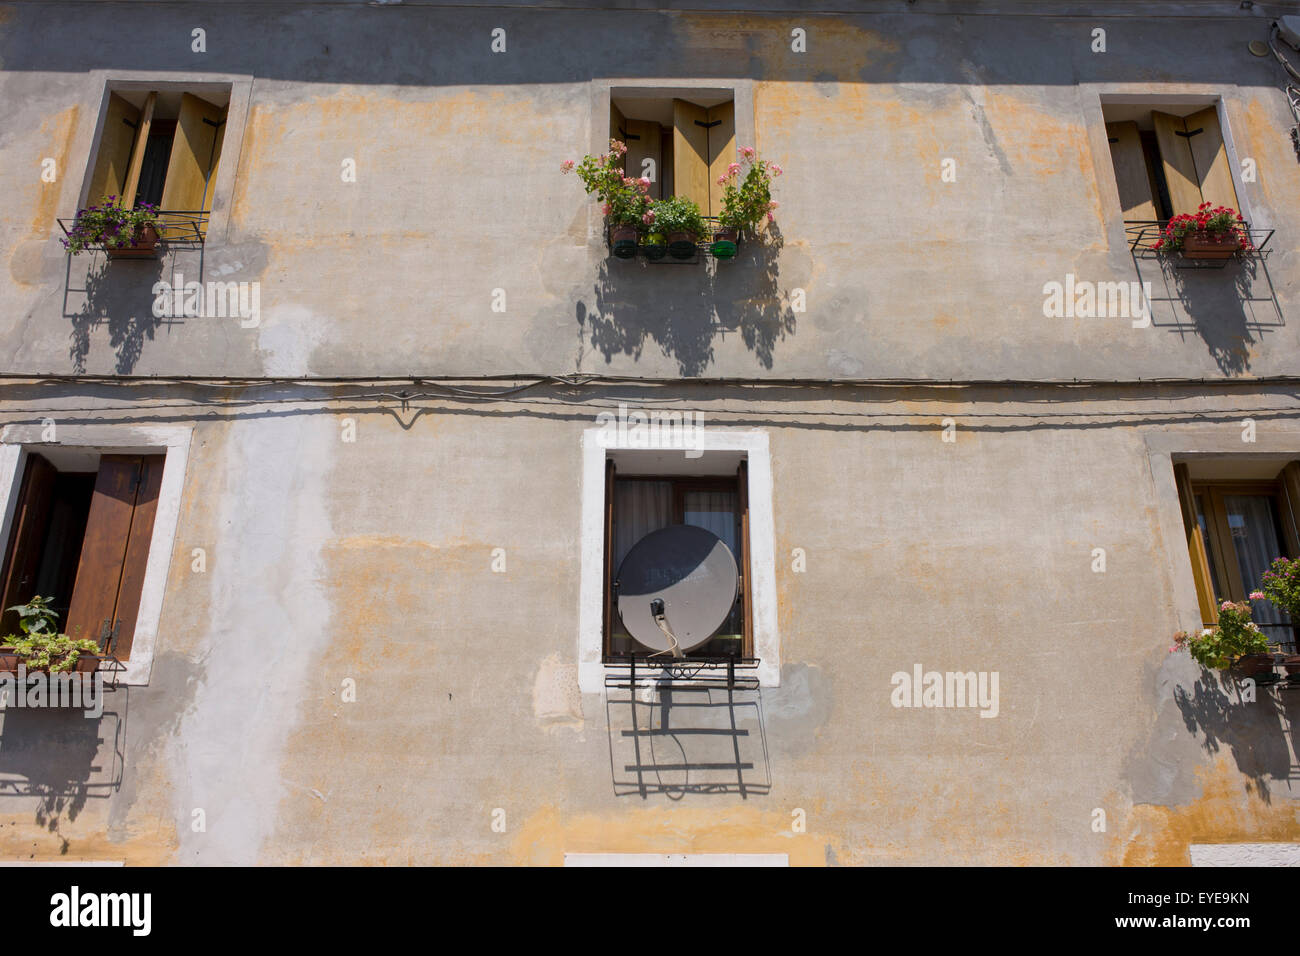 A satellite dish takes up the space of an Italian home's window. Stock Photo